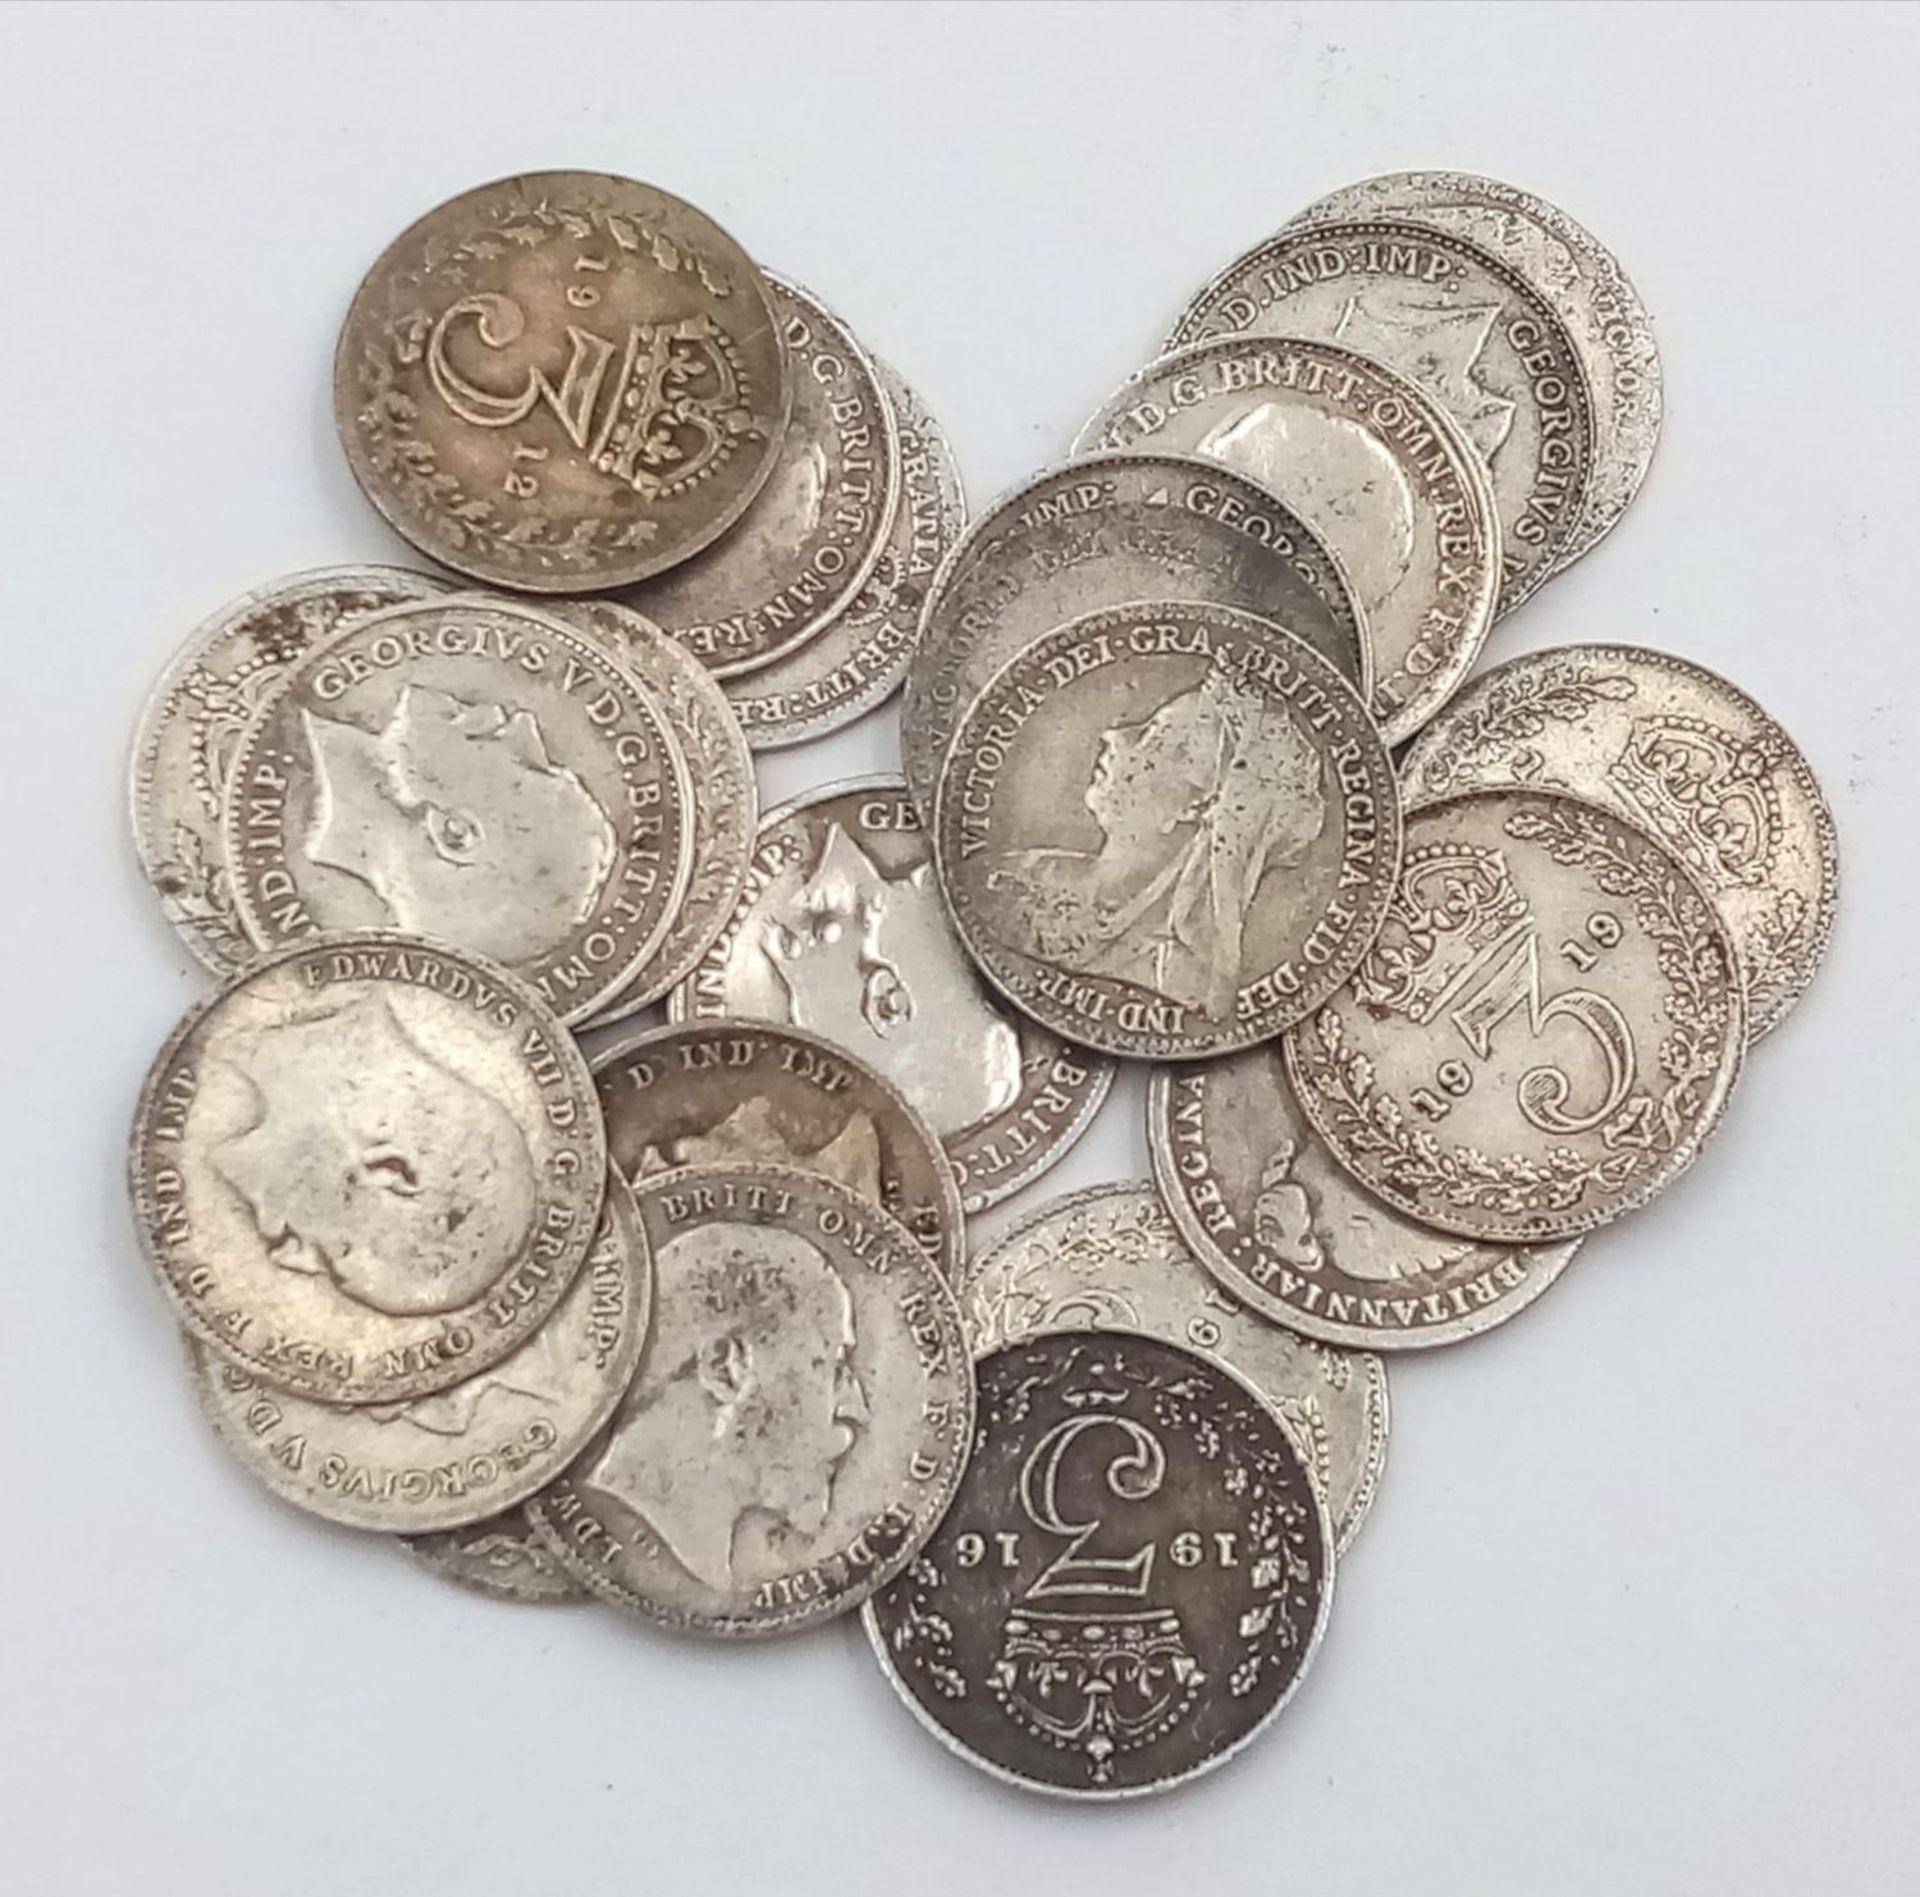 A Collection of 23 British Pre 1920 Silver Threepence coins. - Image 2 of 4